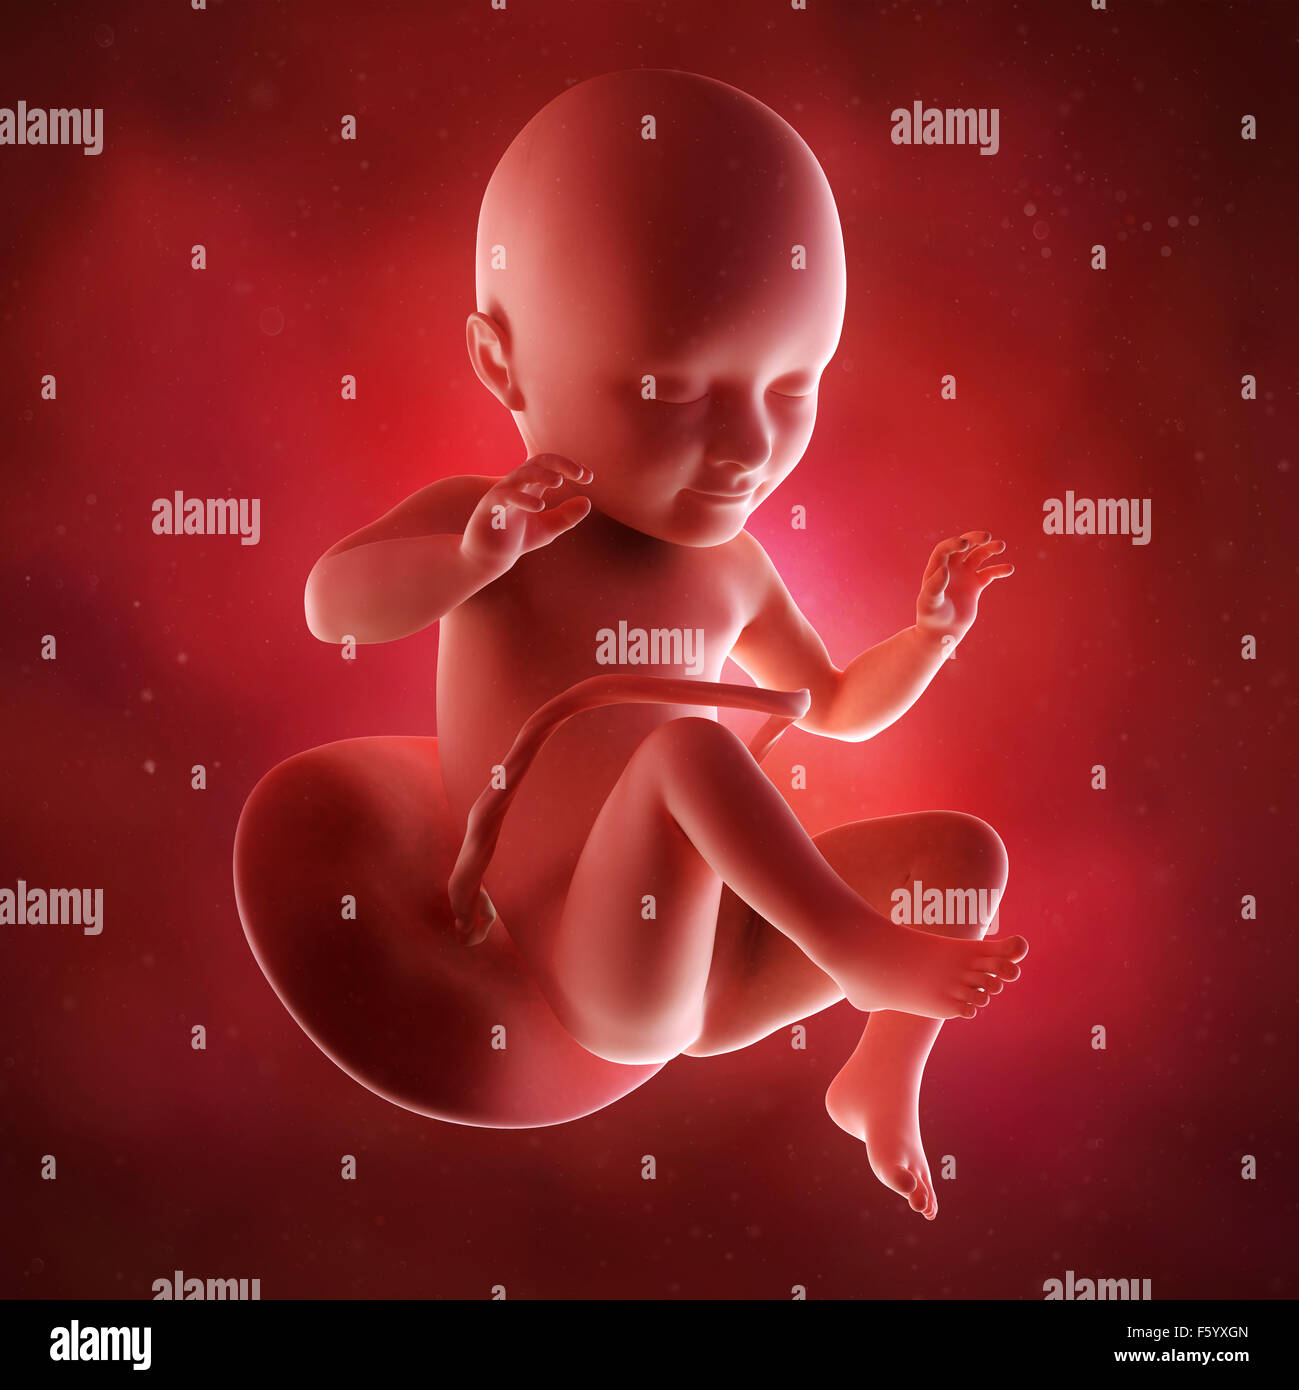 medical accurate 3d illustration of a fetus week 34 Stock Photo